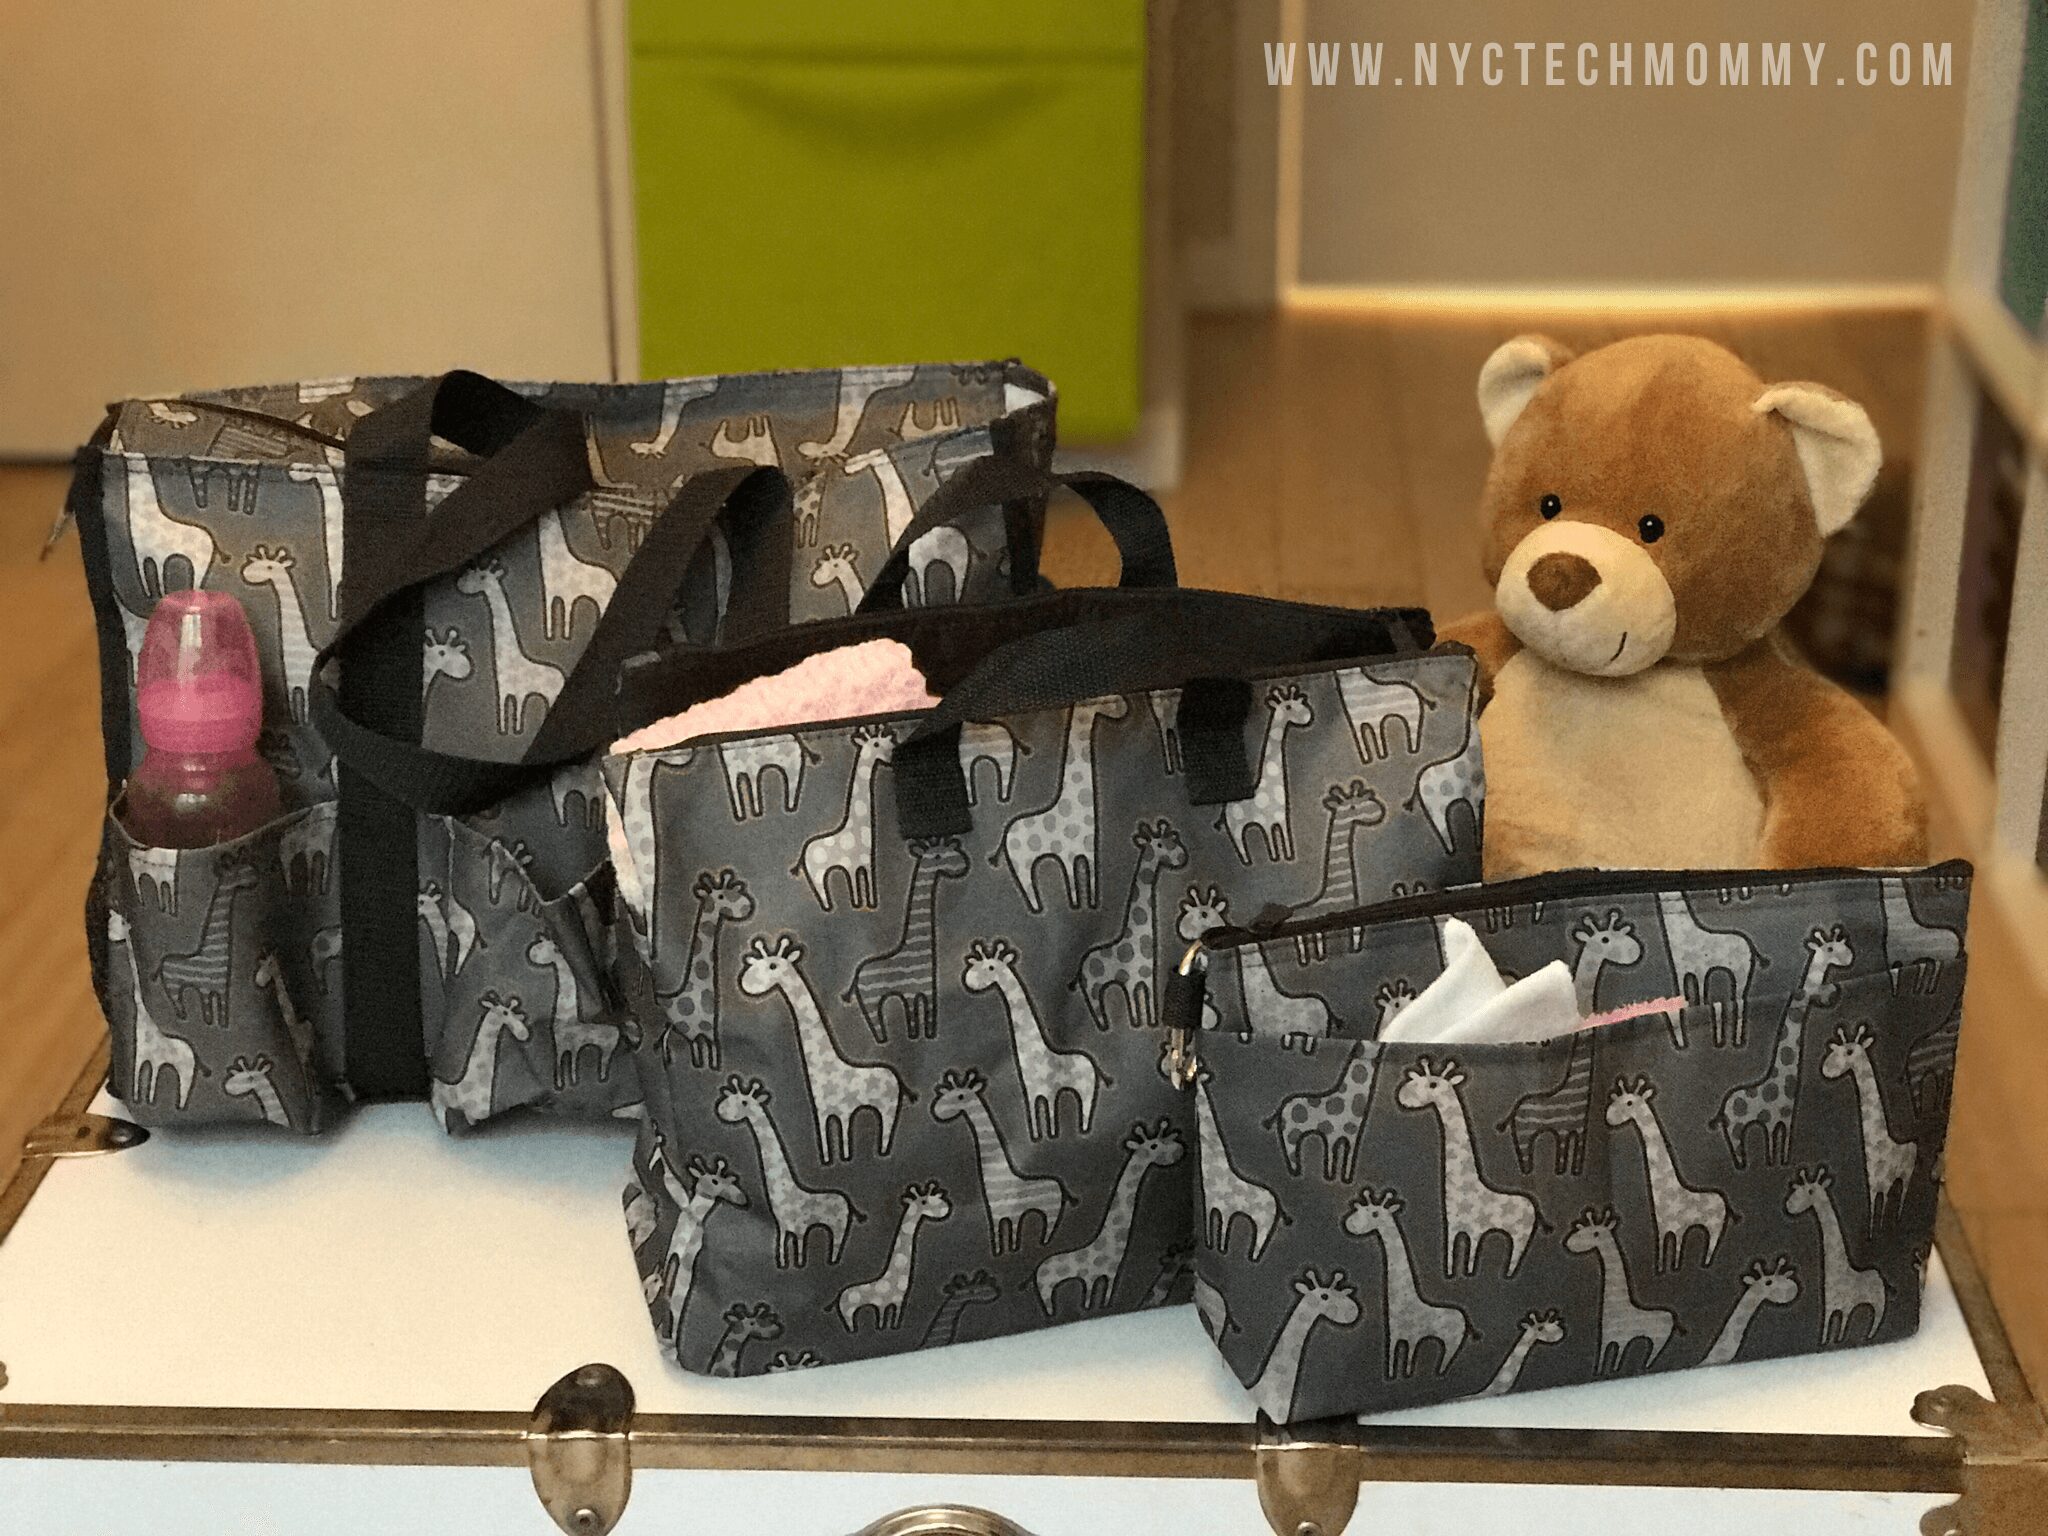 Thirty One Diaper Bag Review